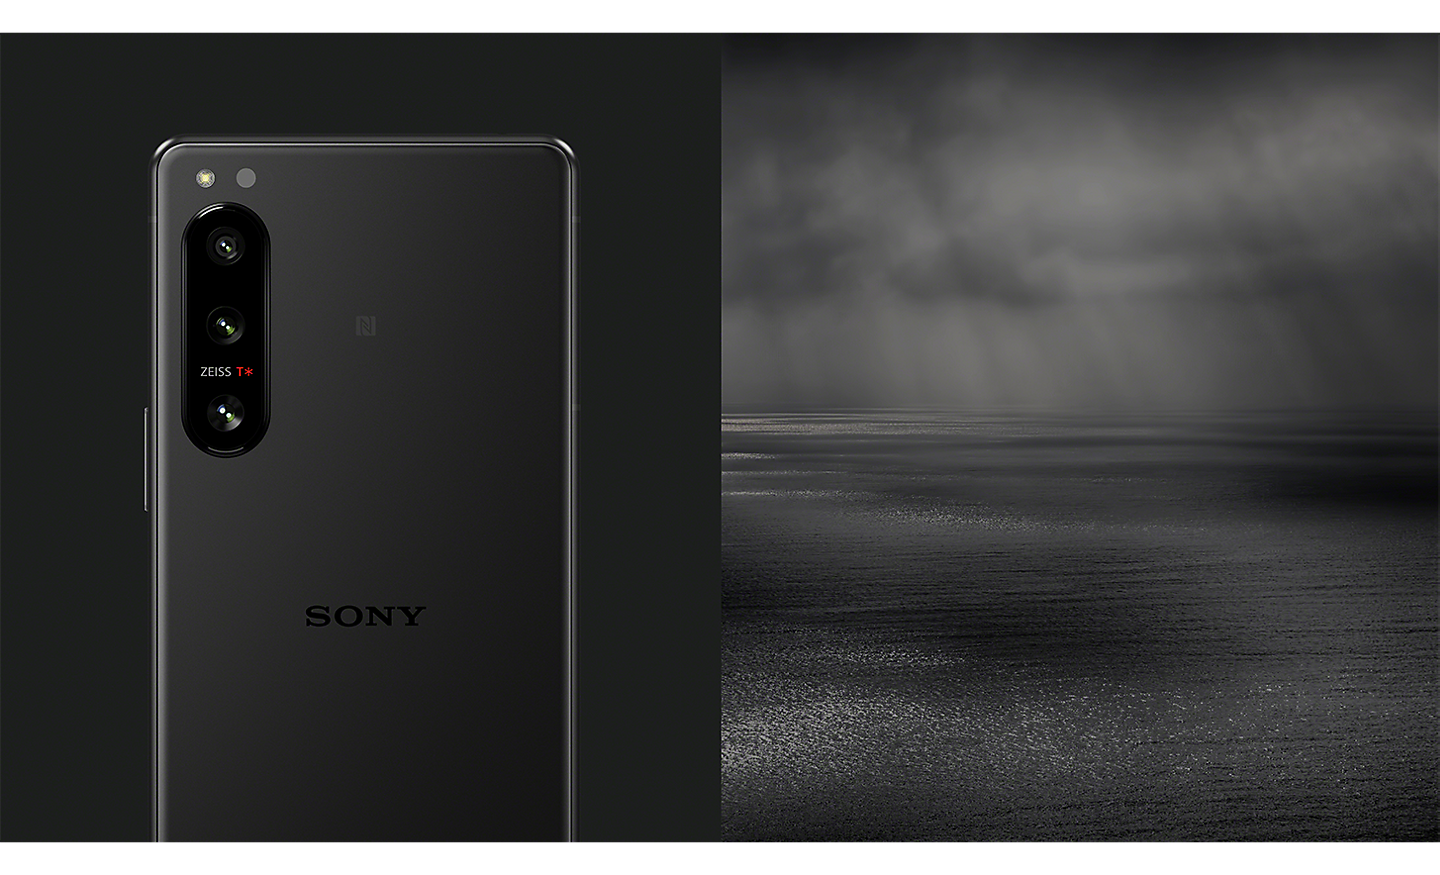 An Xperia 5 IV in black, next to an image of a dark, moody seascape